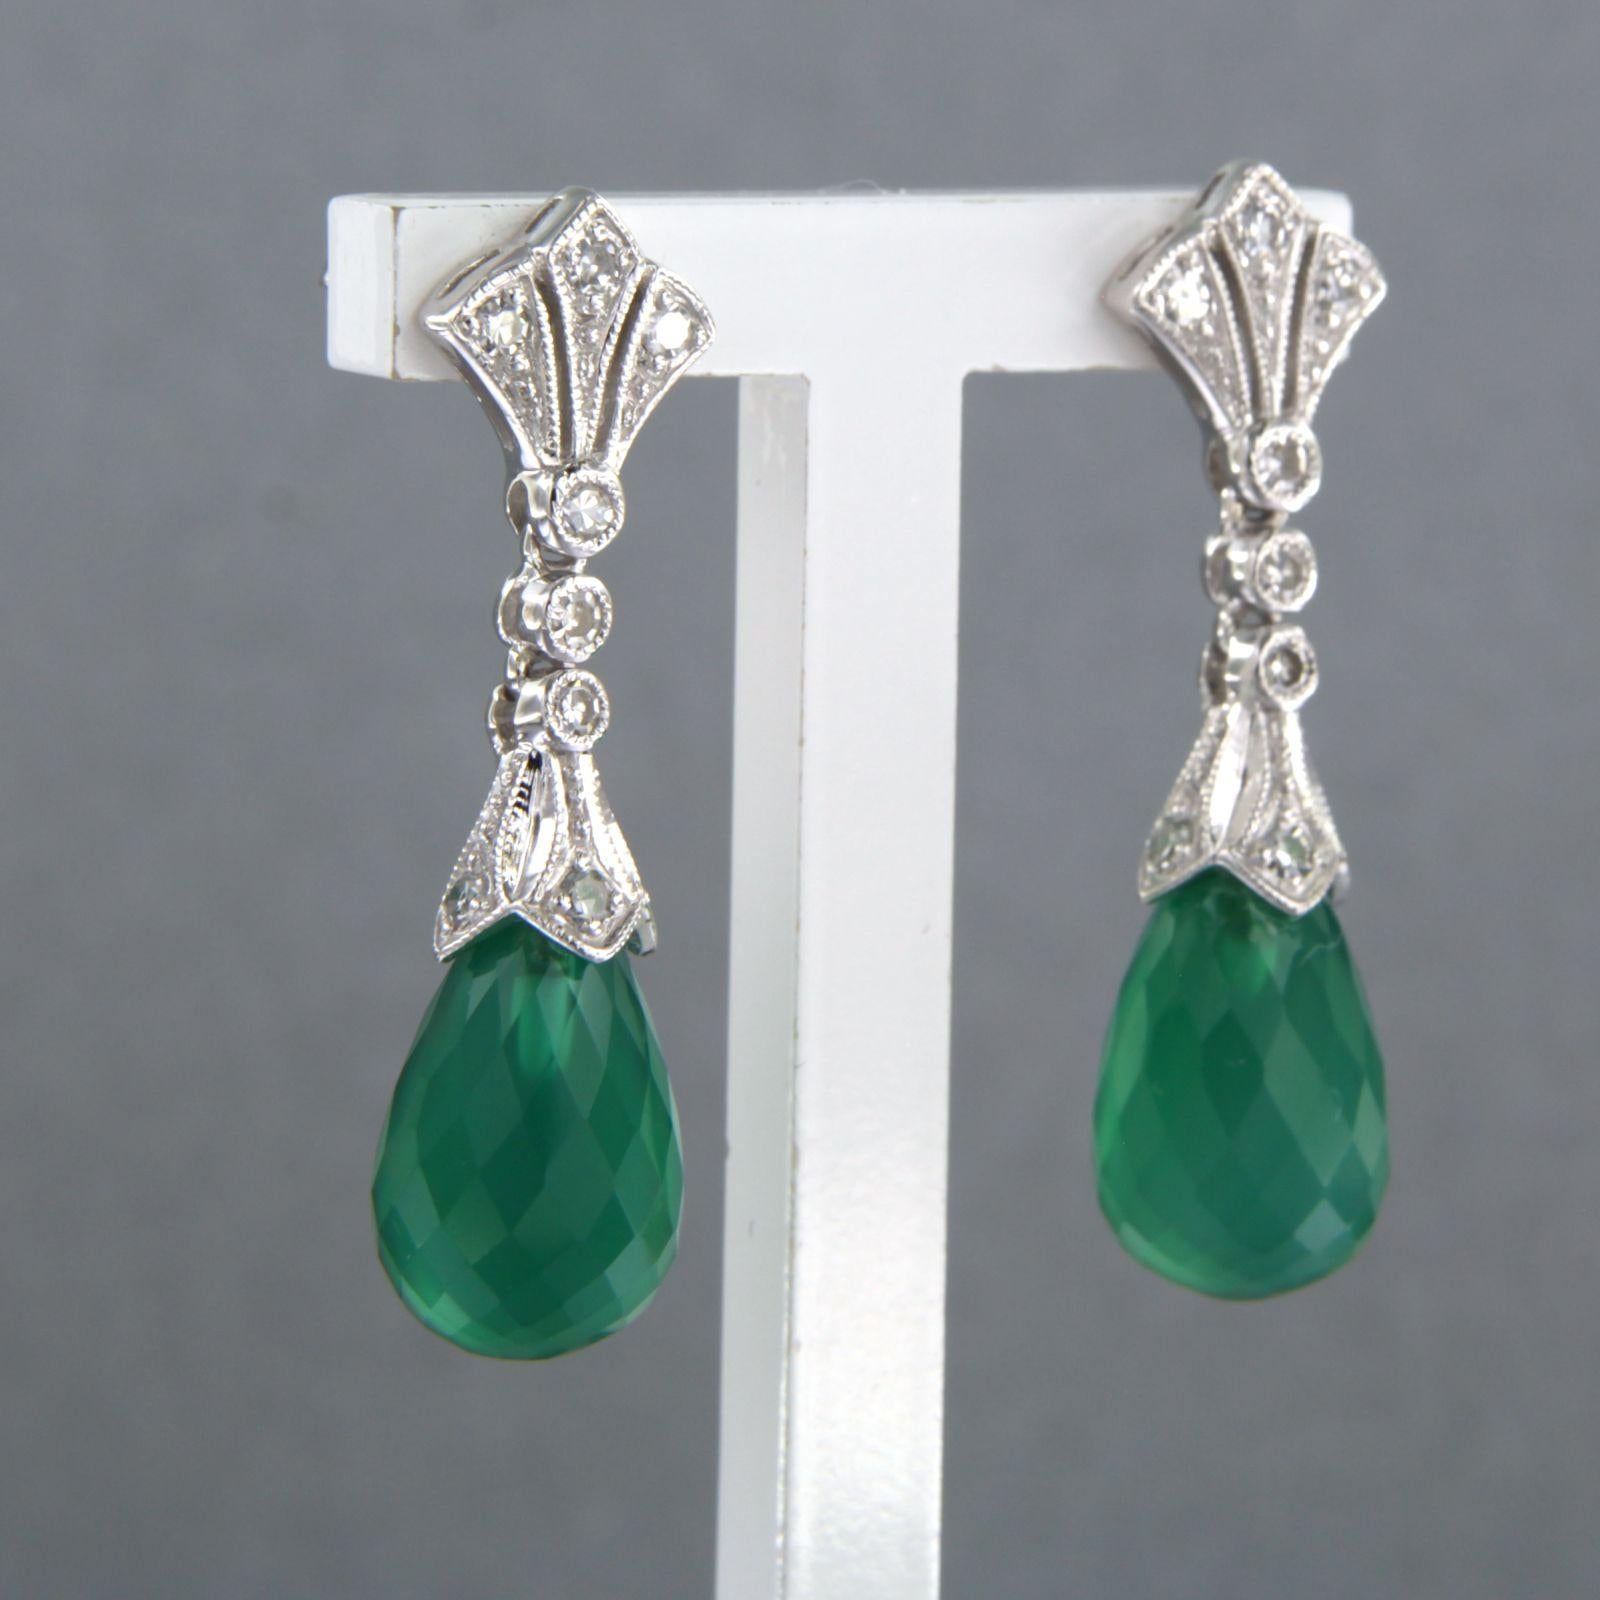 14kt white gold earrings set with green onyx and single cut diamond total 0.34ct For Sale 1